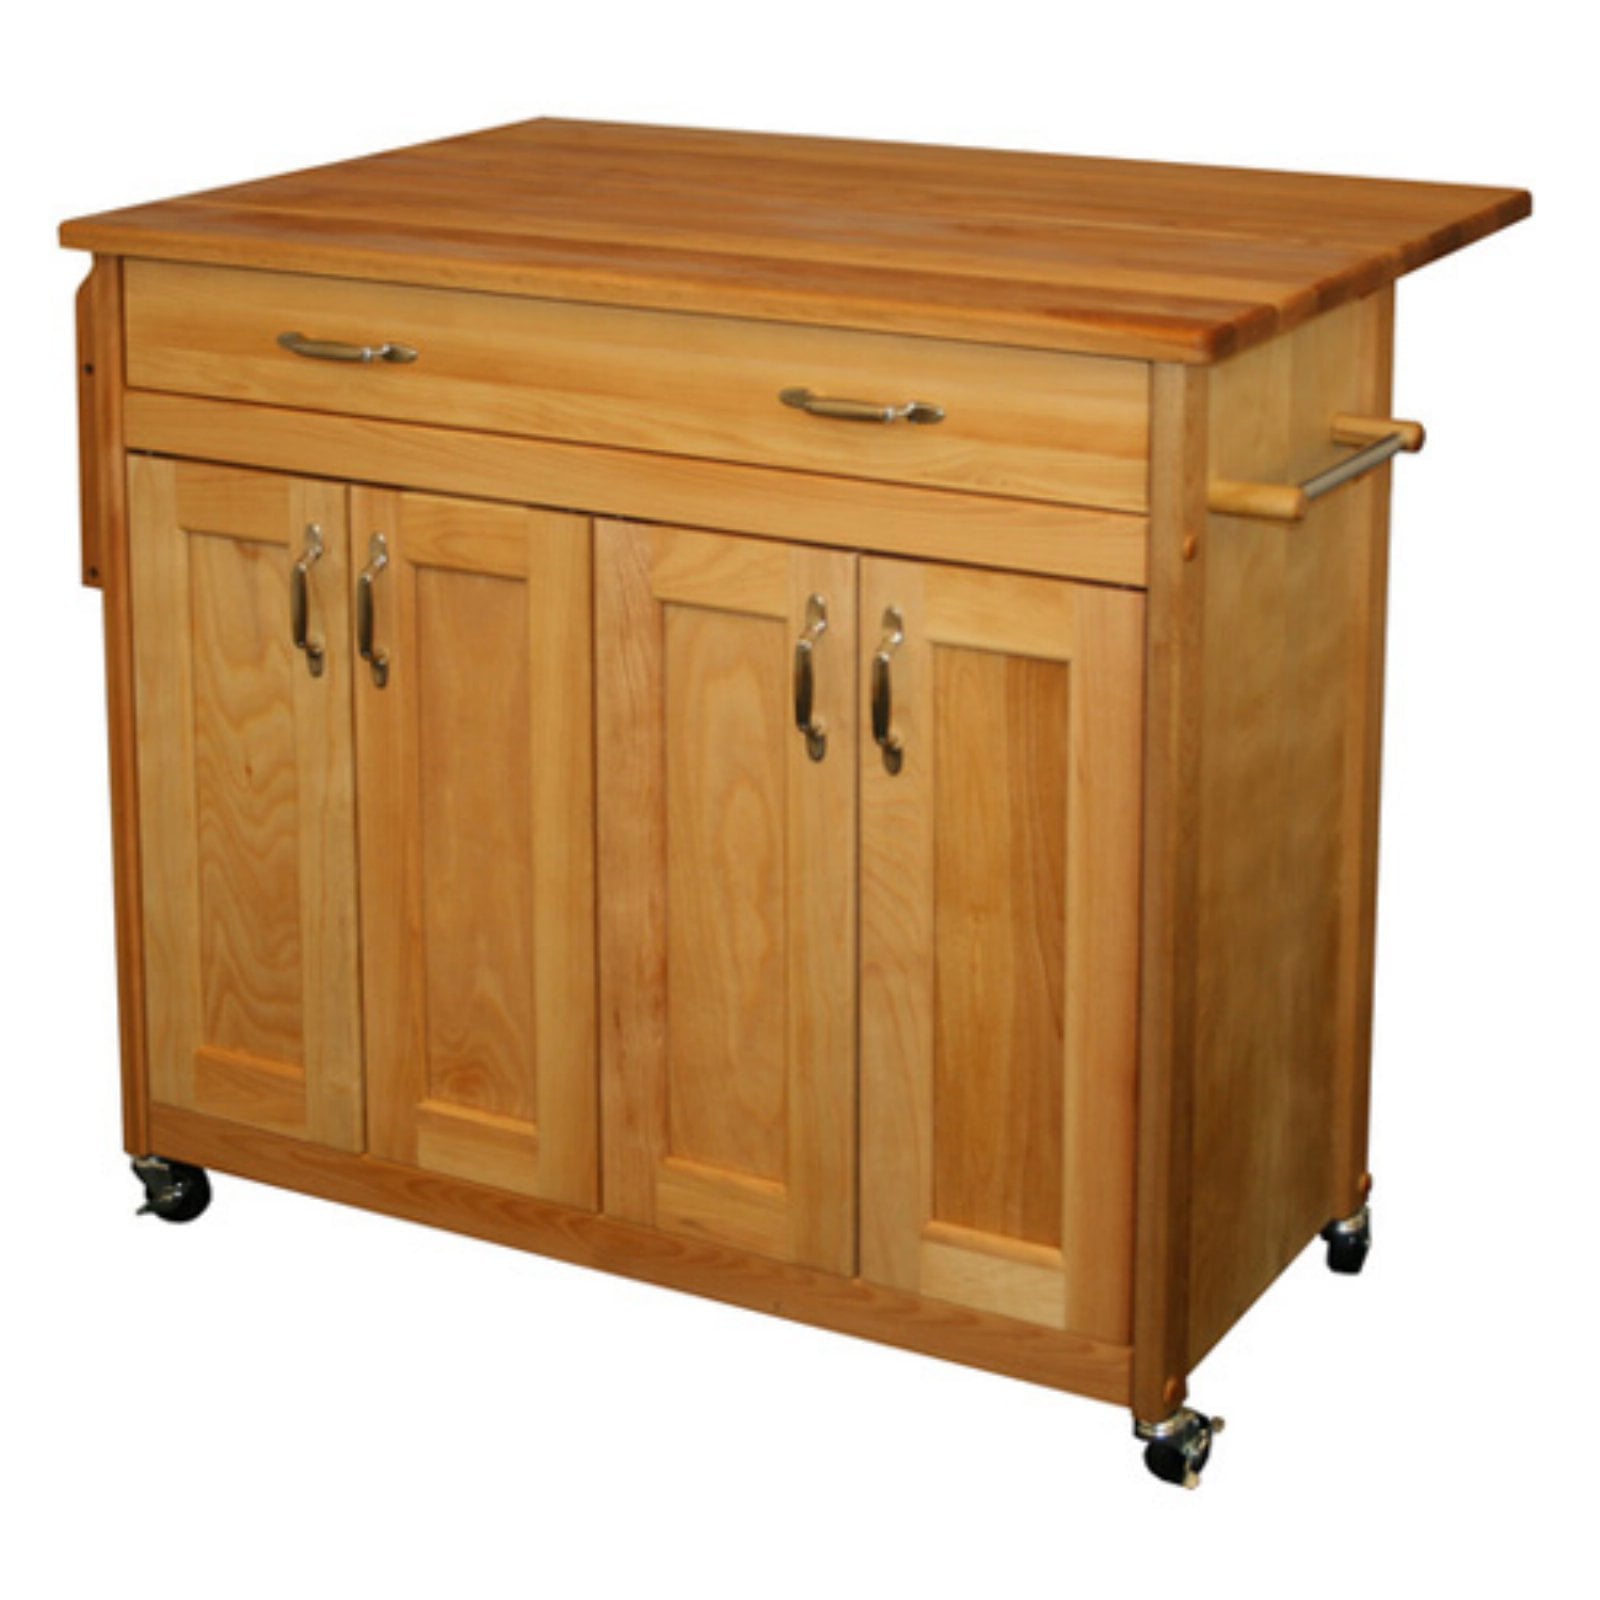 Catskill Mid-Sized Wood Island with Flat Panel Doors and Drop Leaf in Oak